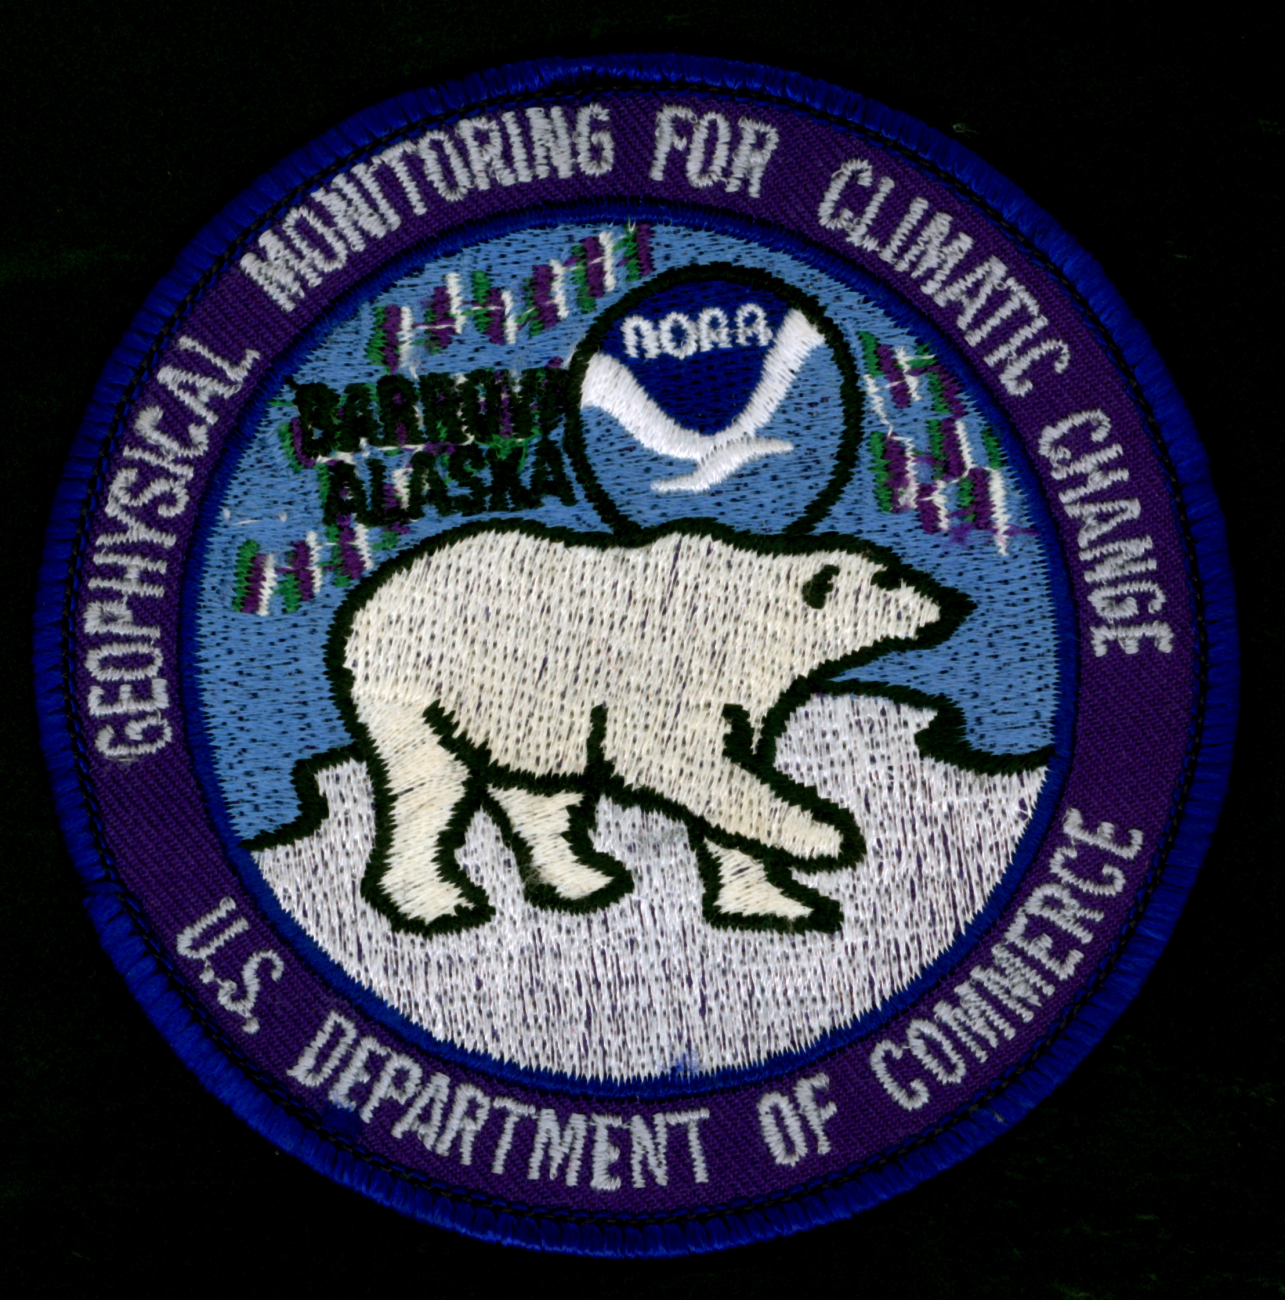 Patch commemorating the Point Barrow Observatory of NOAA's GeophysicalMonitoring for Climatic Change Program